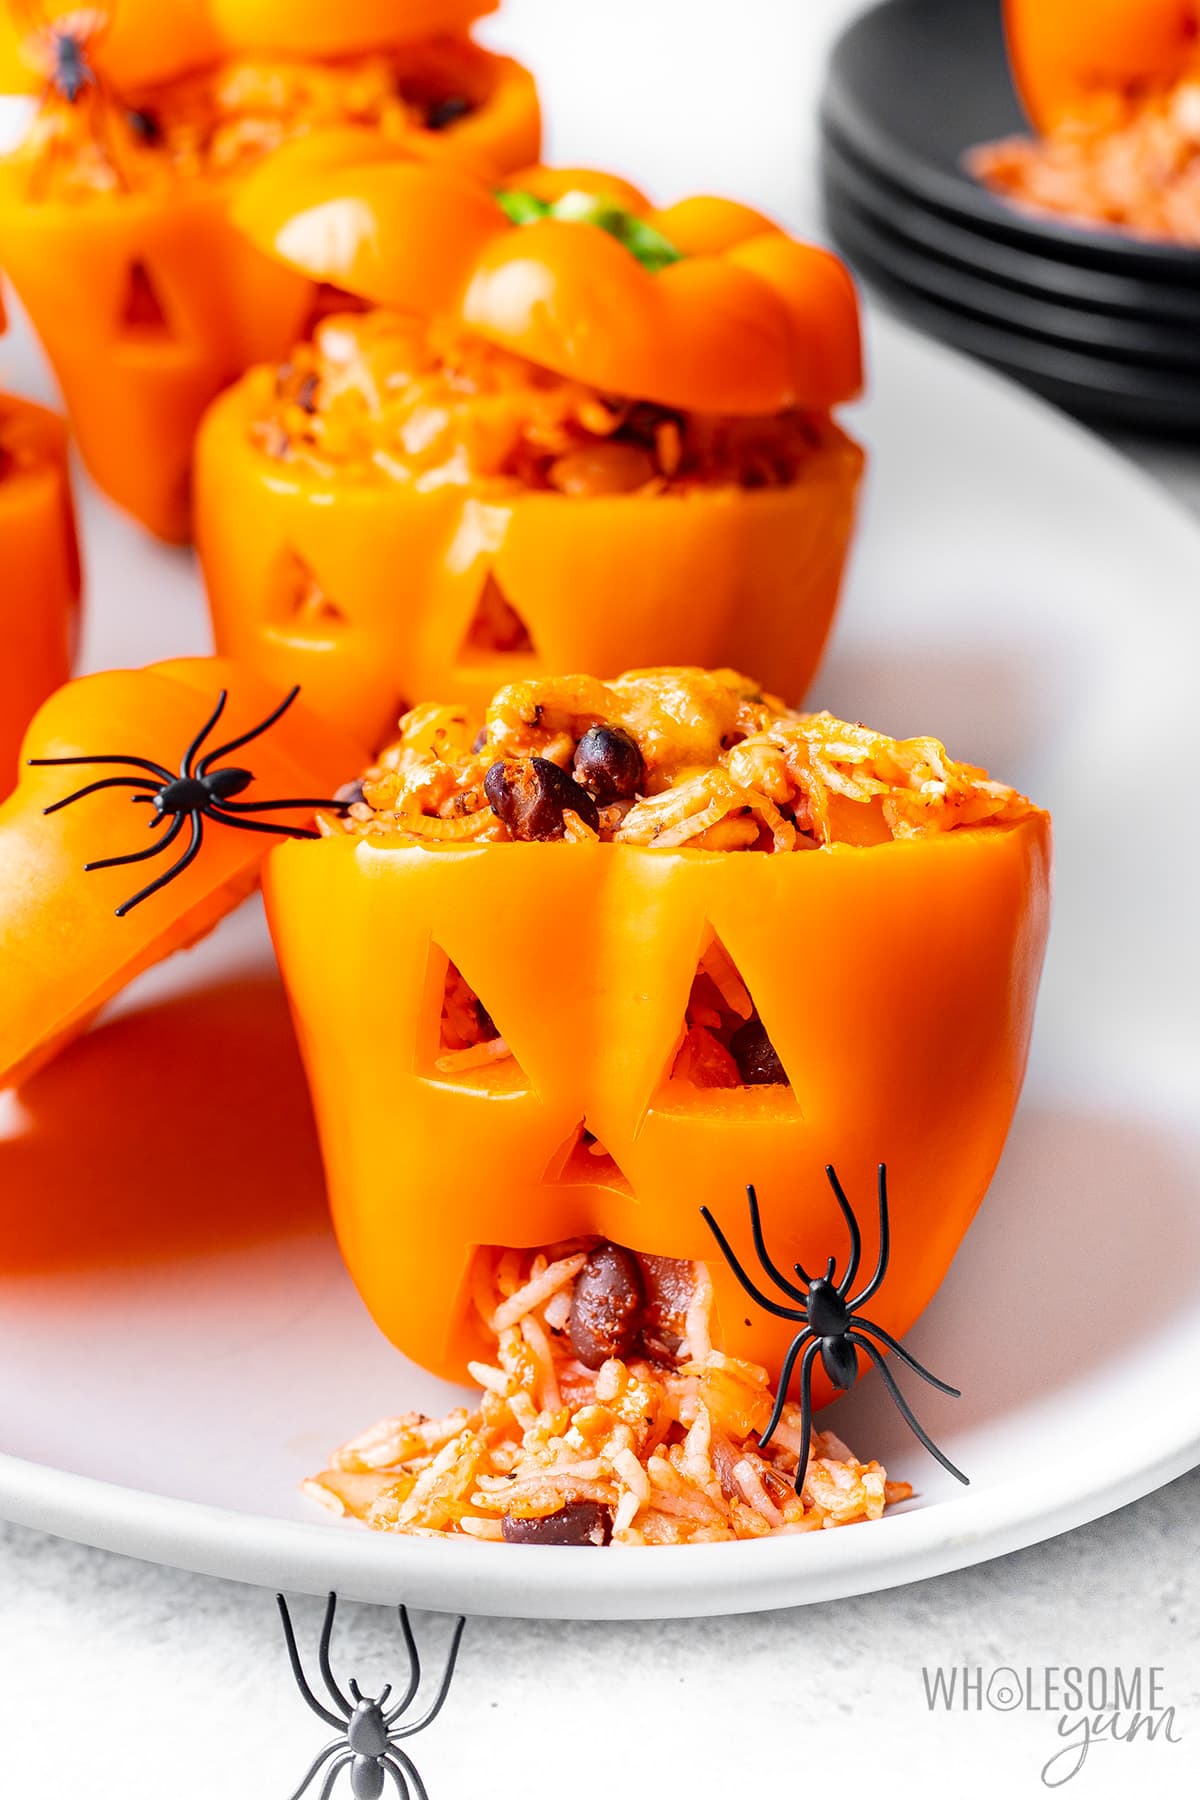 Halloween stuffed peppers with rice coming out of the mouth.